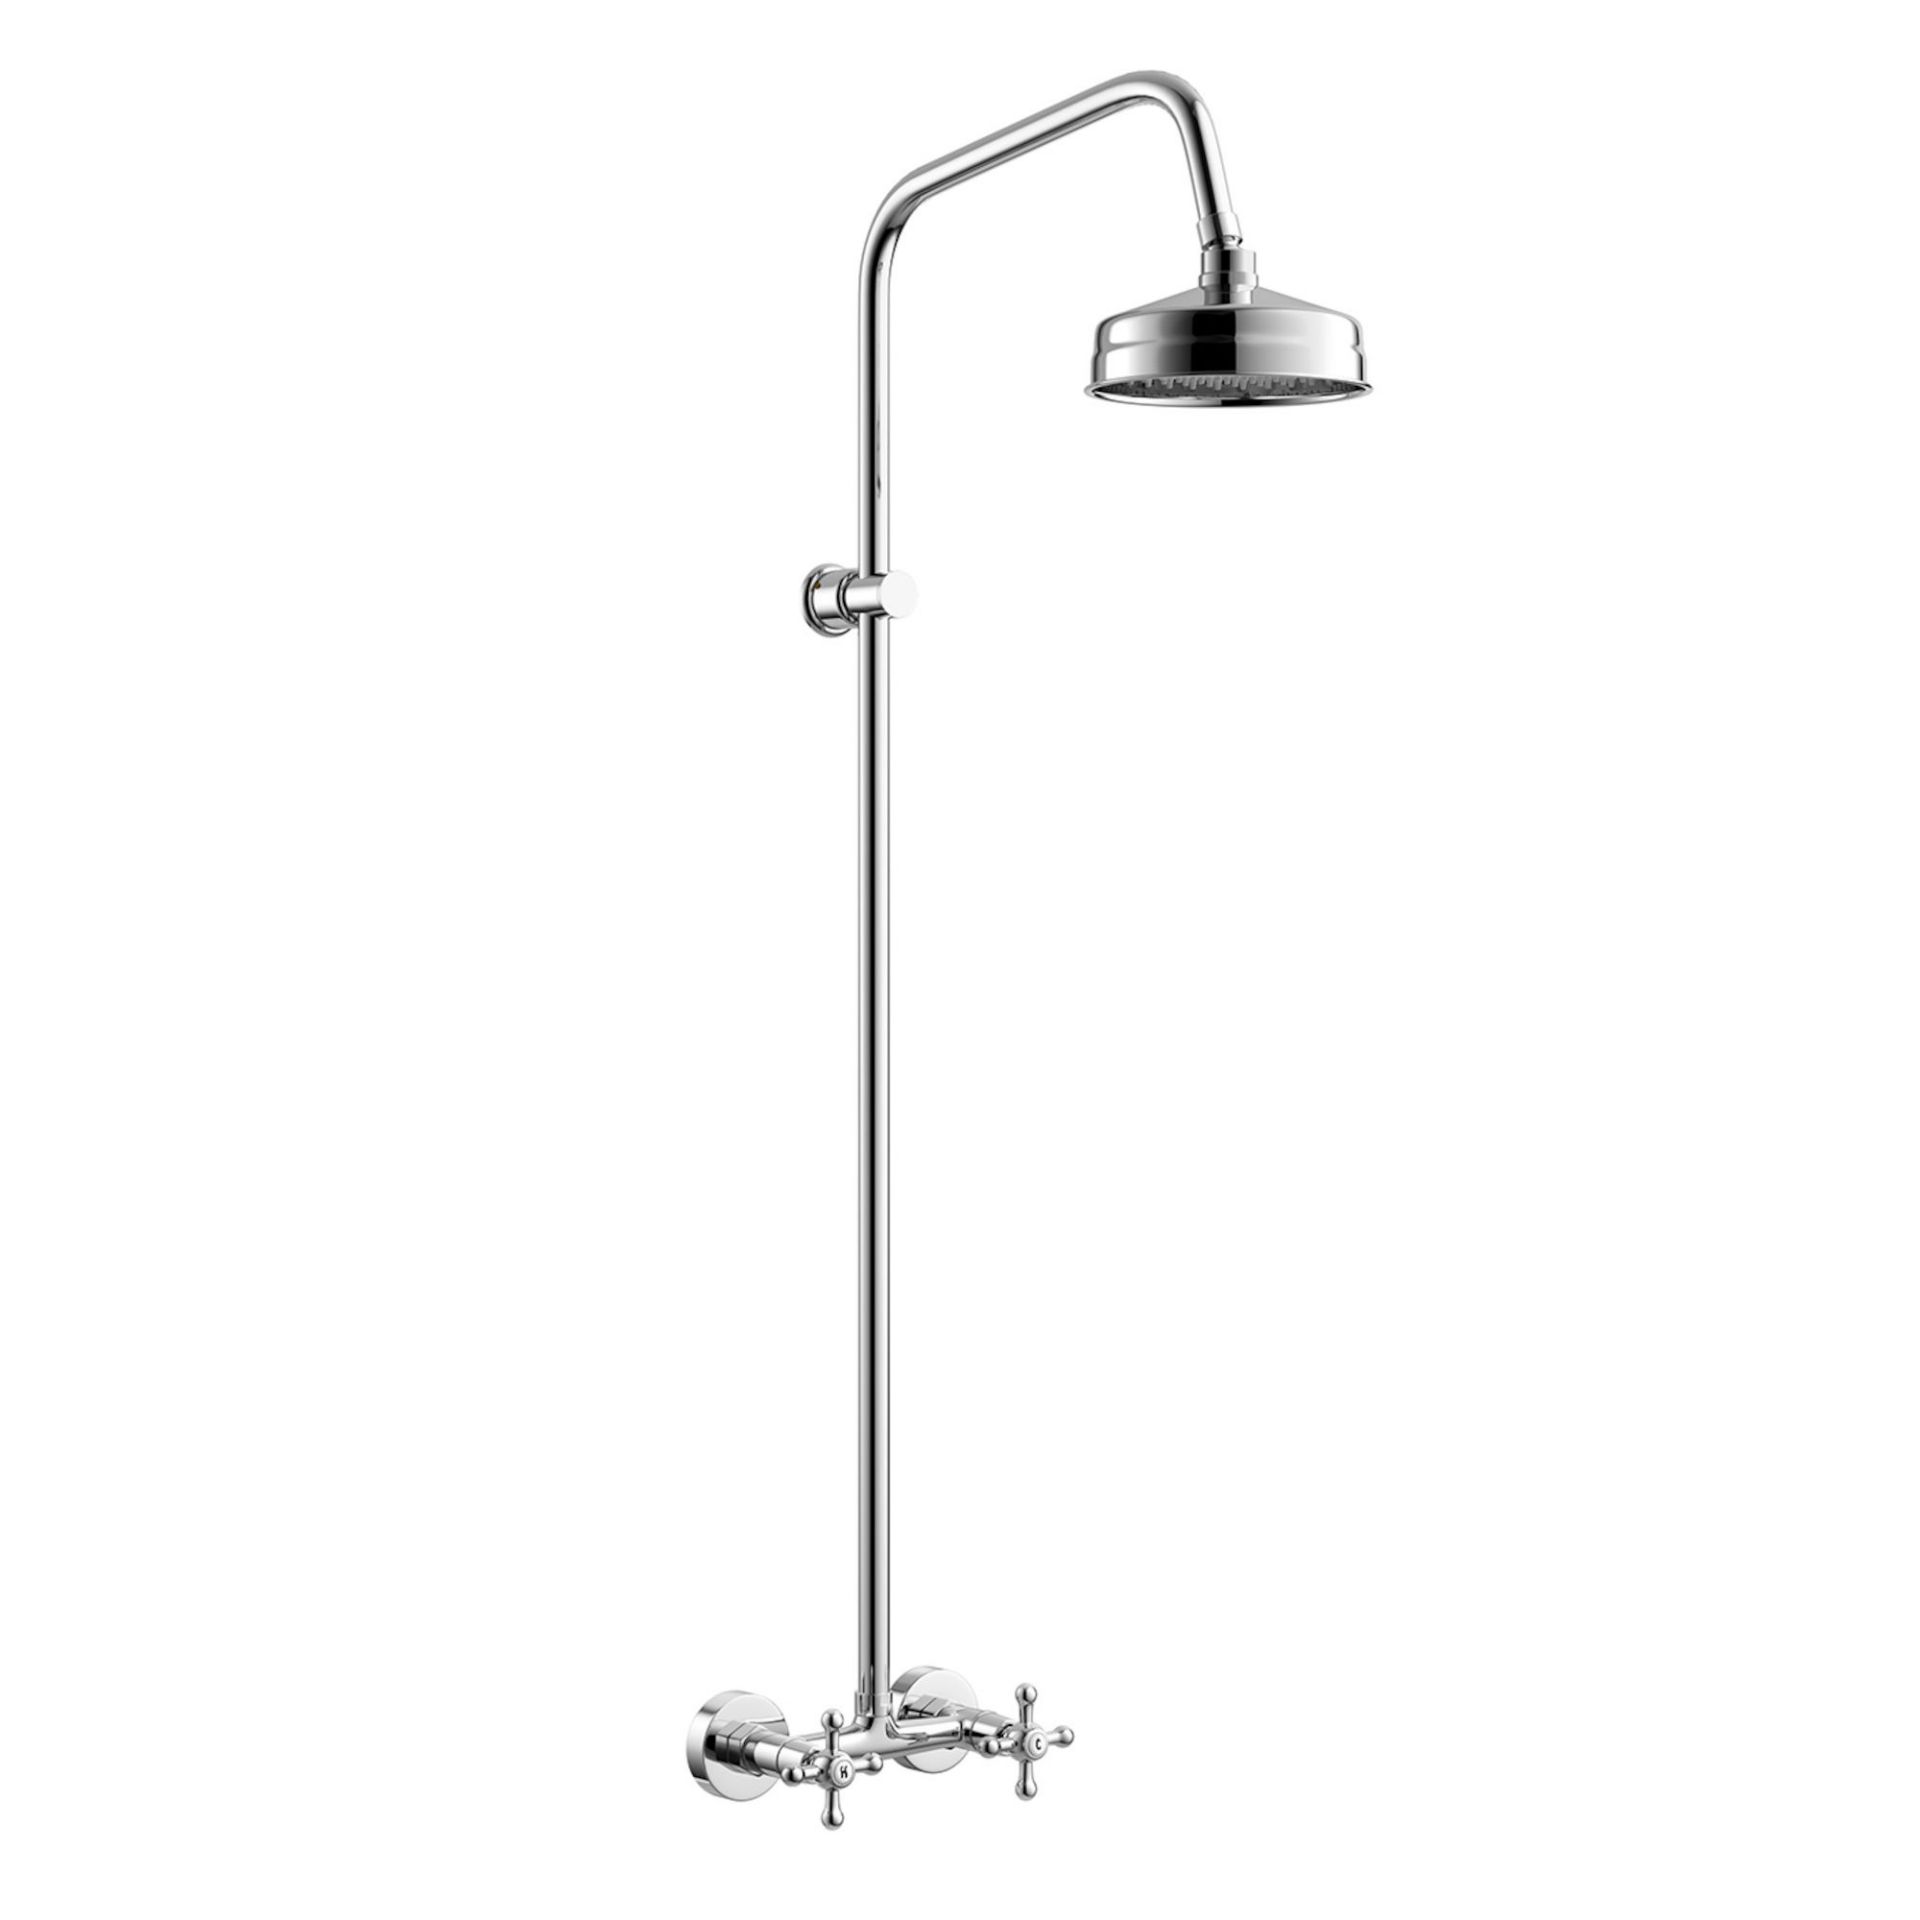 (QW26) Traditional Exposed Shower & Medium Head. Exposed design makes for a statement piece - Image 8 of 12